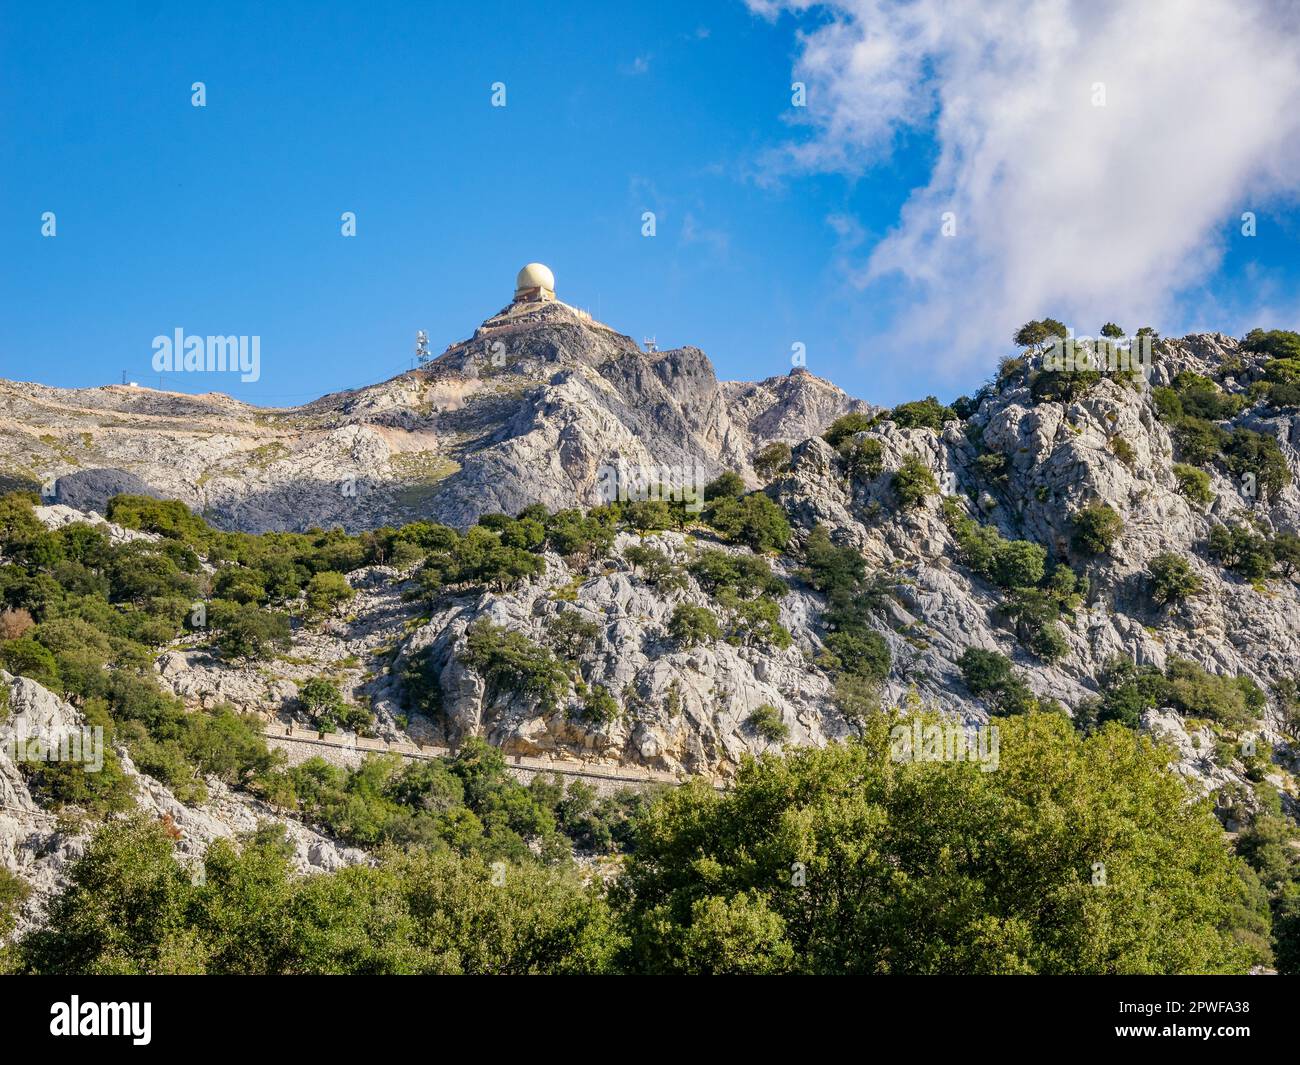 Puig Major the highest peak of the Serra de Tramuntana mountains in Majorca Spain and its prominent US Air Force radar dome at the summit Stock Photo